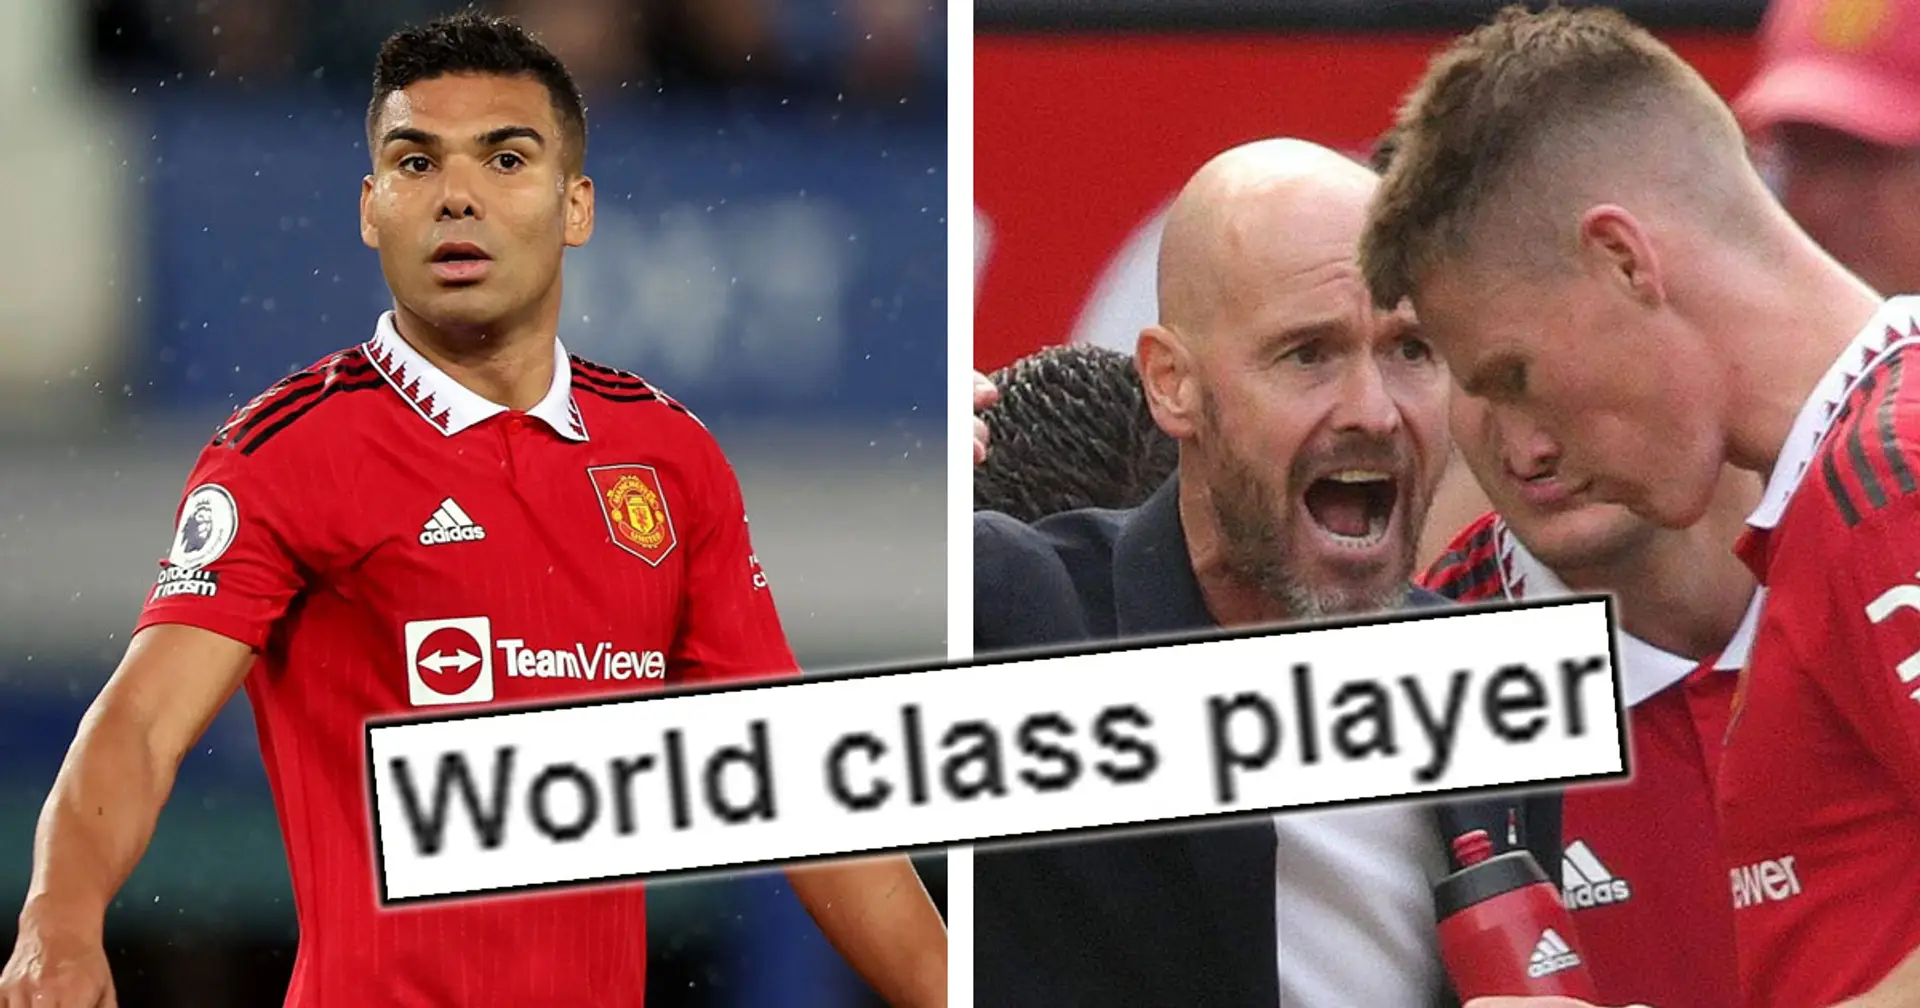 ‘Makes an enormous difference on the pitch’: United fans want Casemiro starting over McTominay regularly